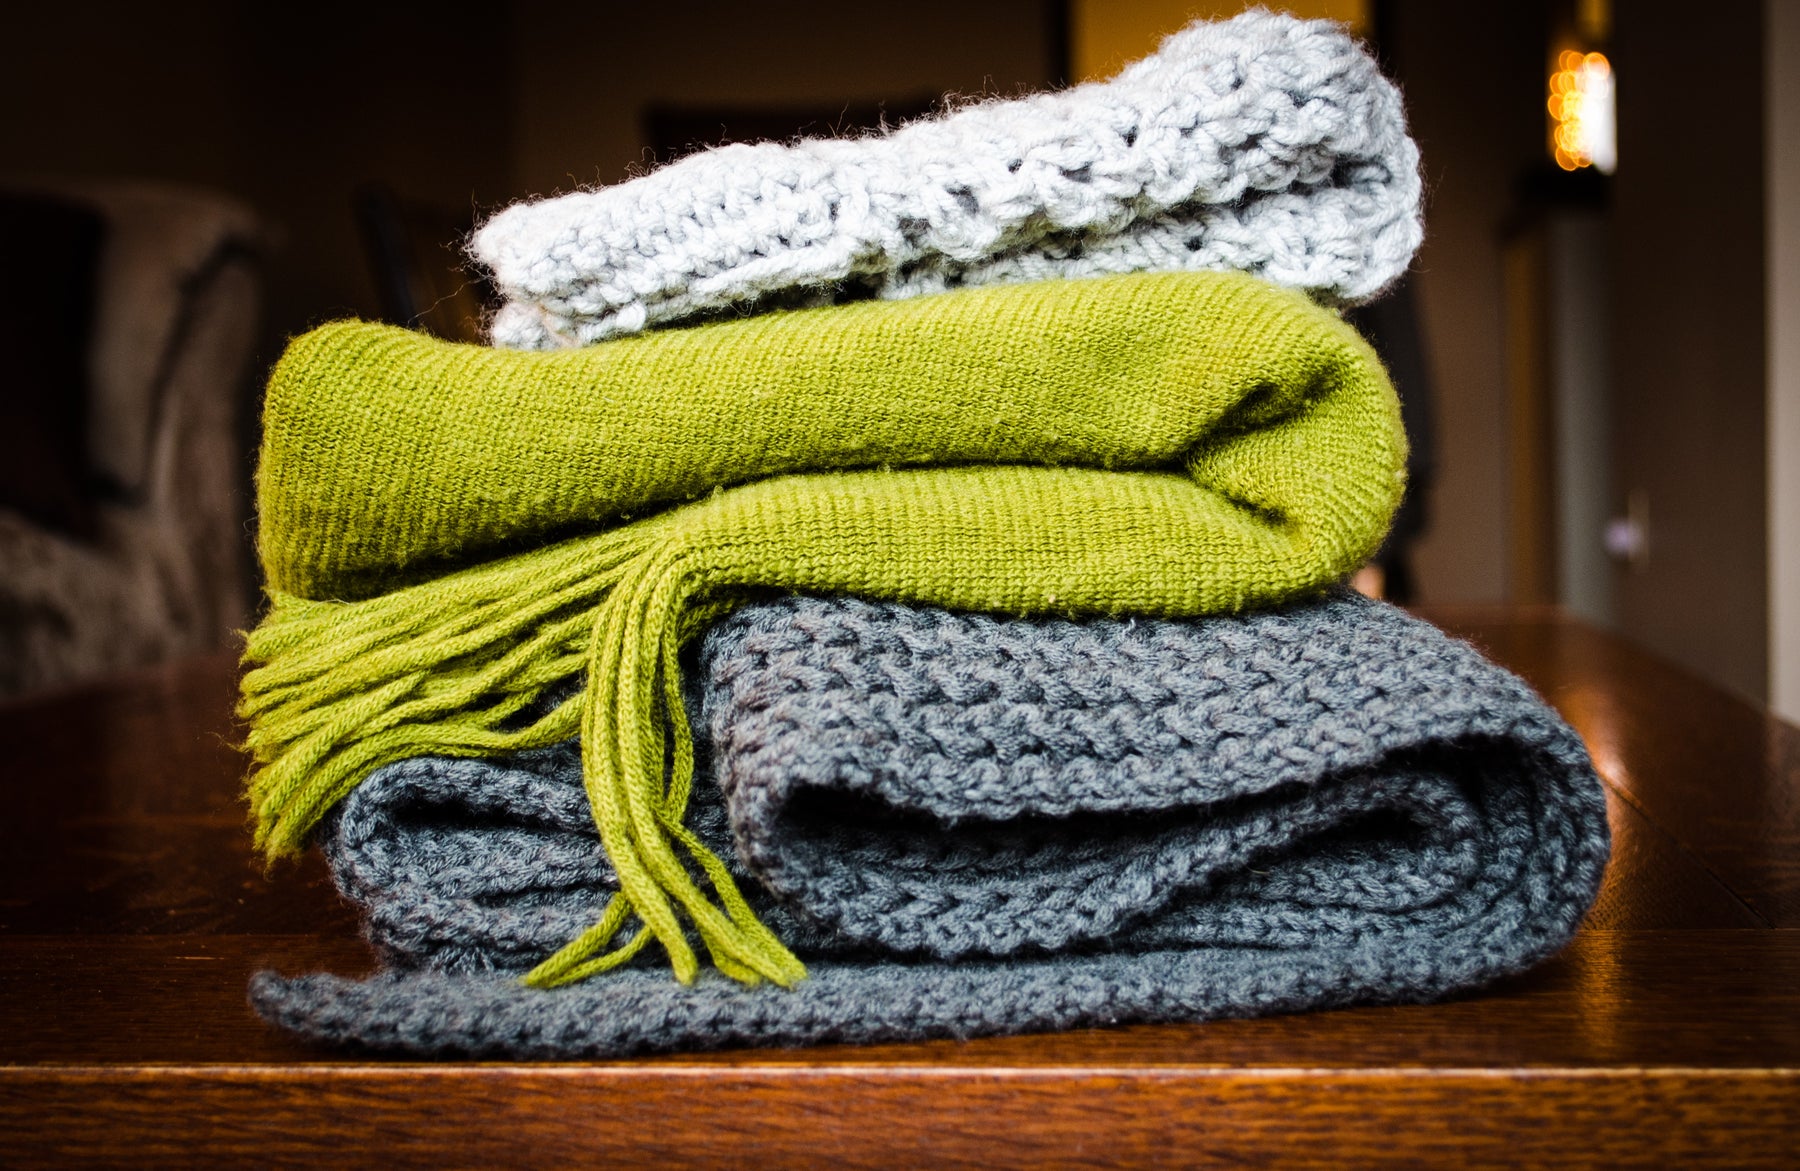 Give Wholesale Fleece Blankets and Spread A Little Love this Winter